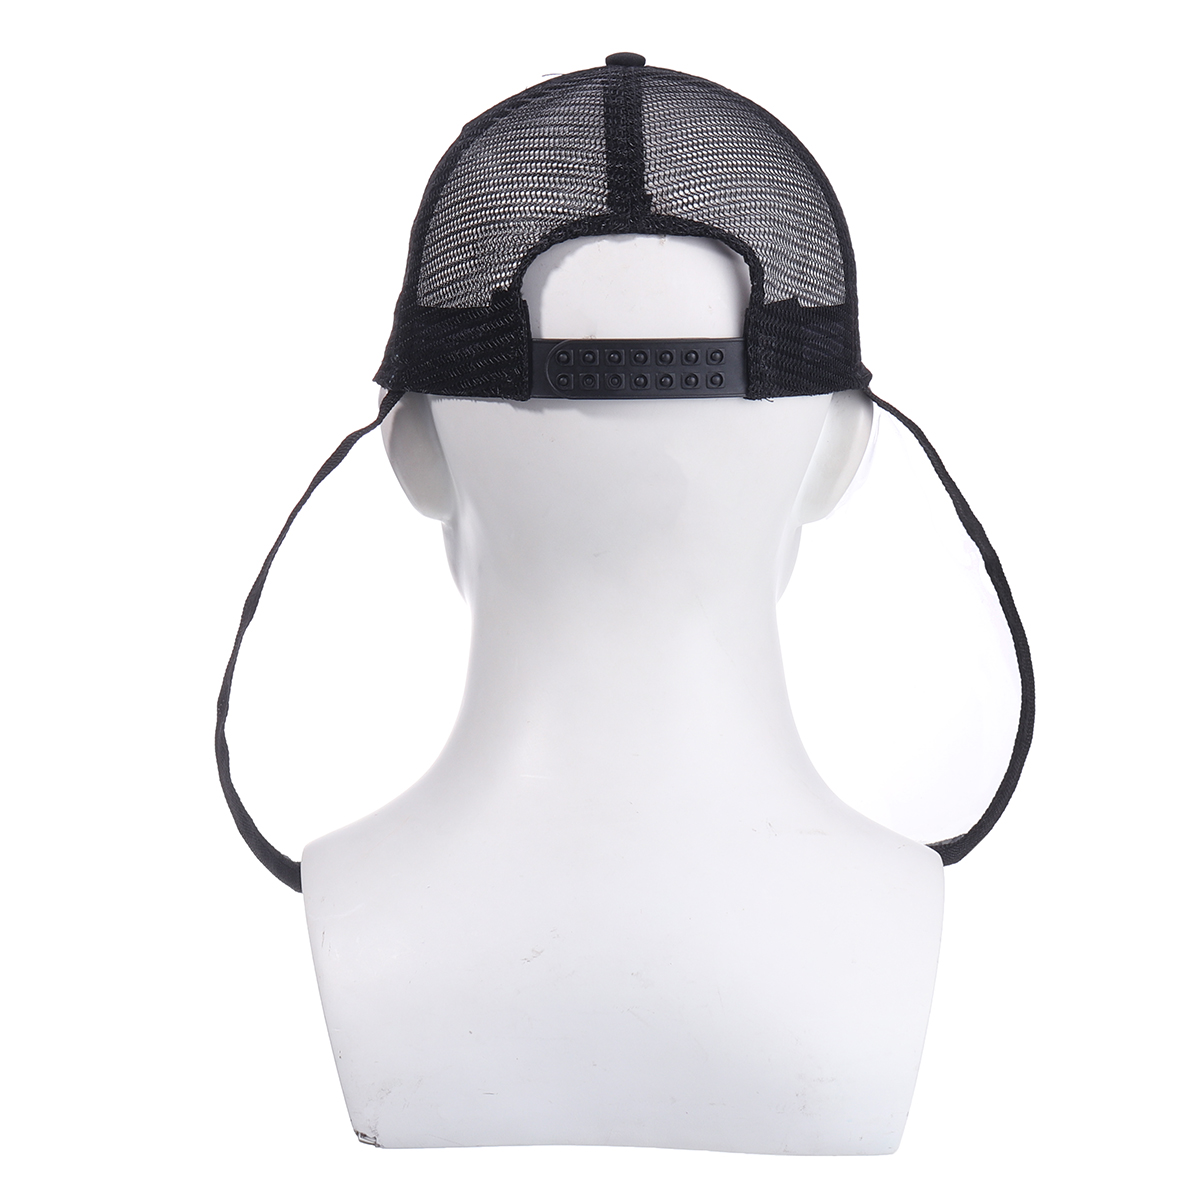 Find Anti spitting Protective Hat Dustproof Cover Peaked Cap Fisherman Sun protection for Sale on Gipsybee.com with cryptocurrencies